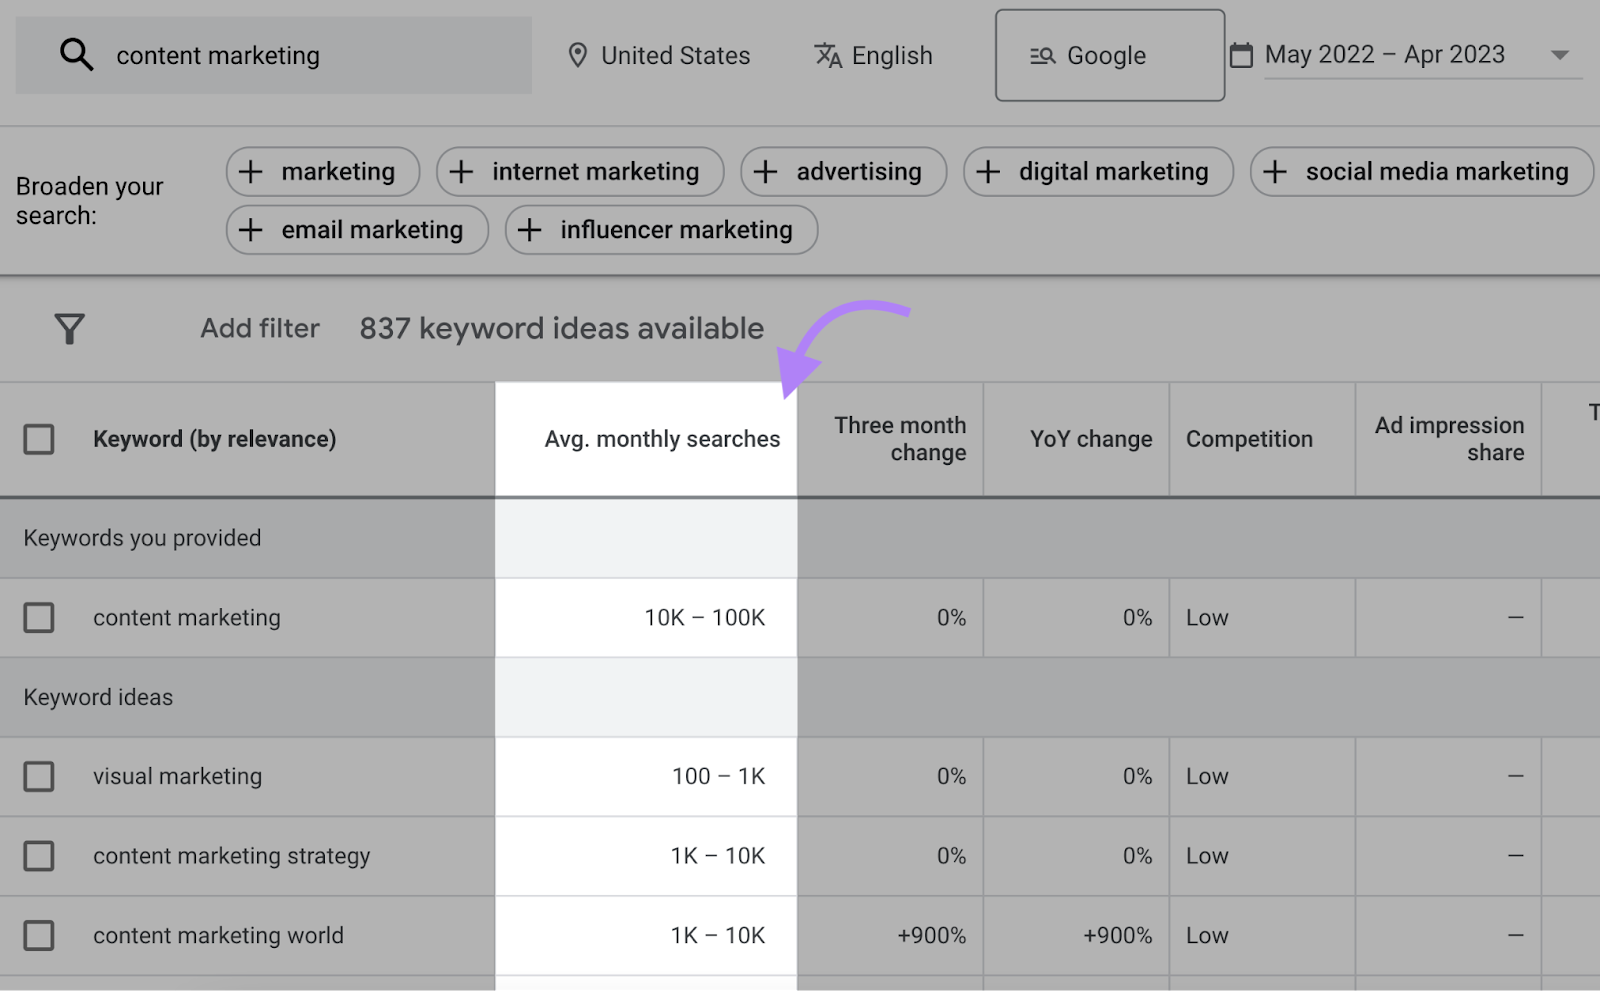 "Avg. monthly searched" metric highlighted for "content marketing" seed keyword and other generated keywords